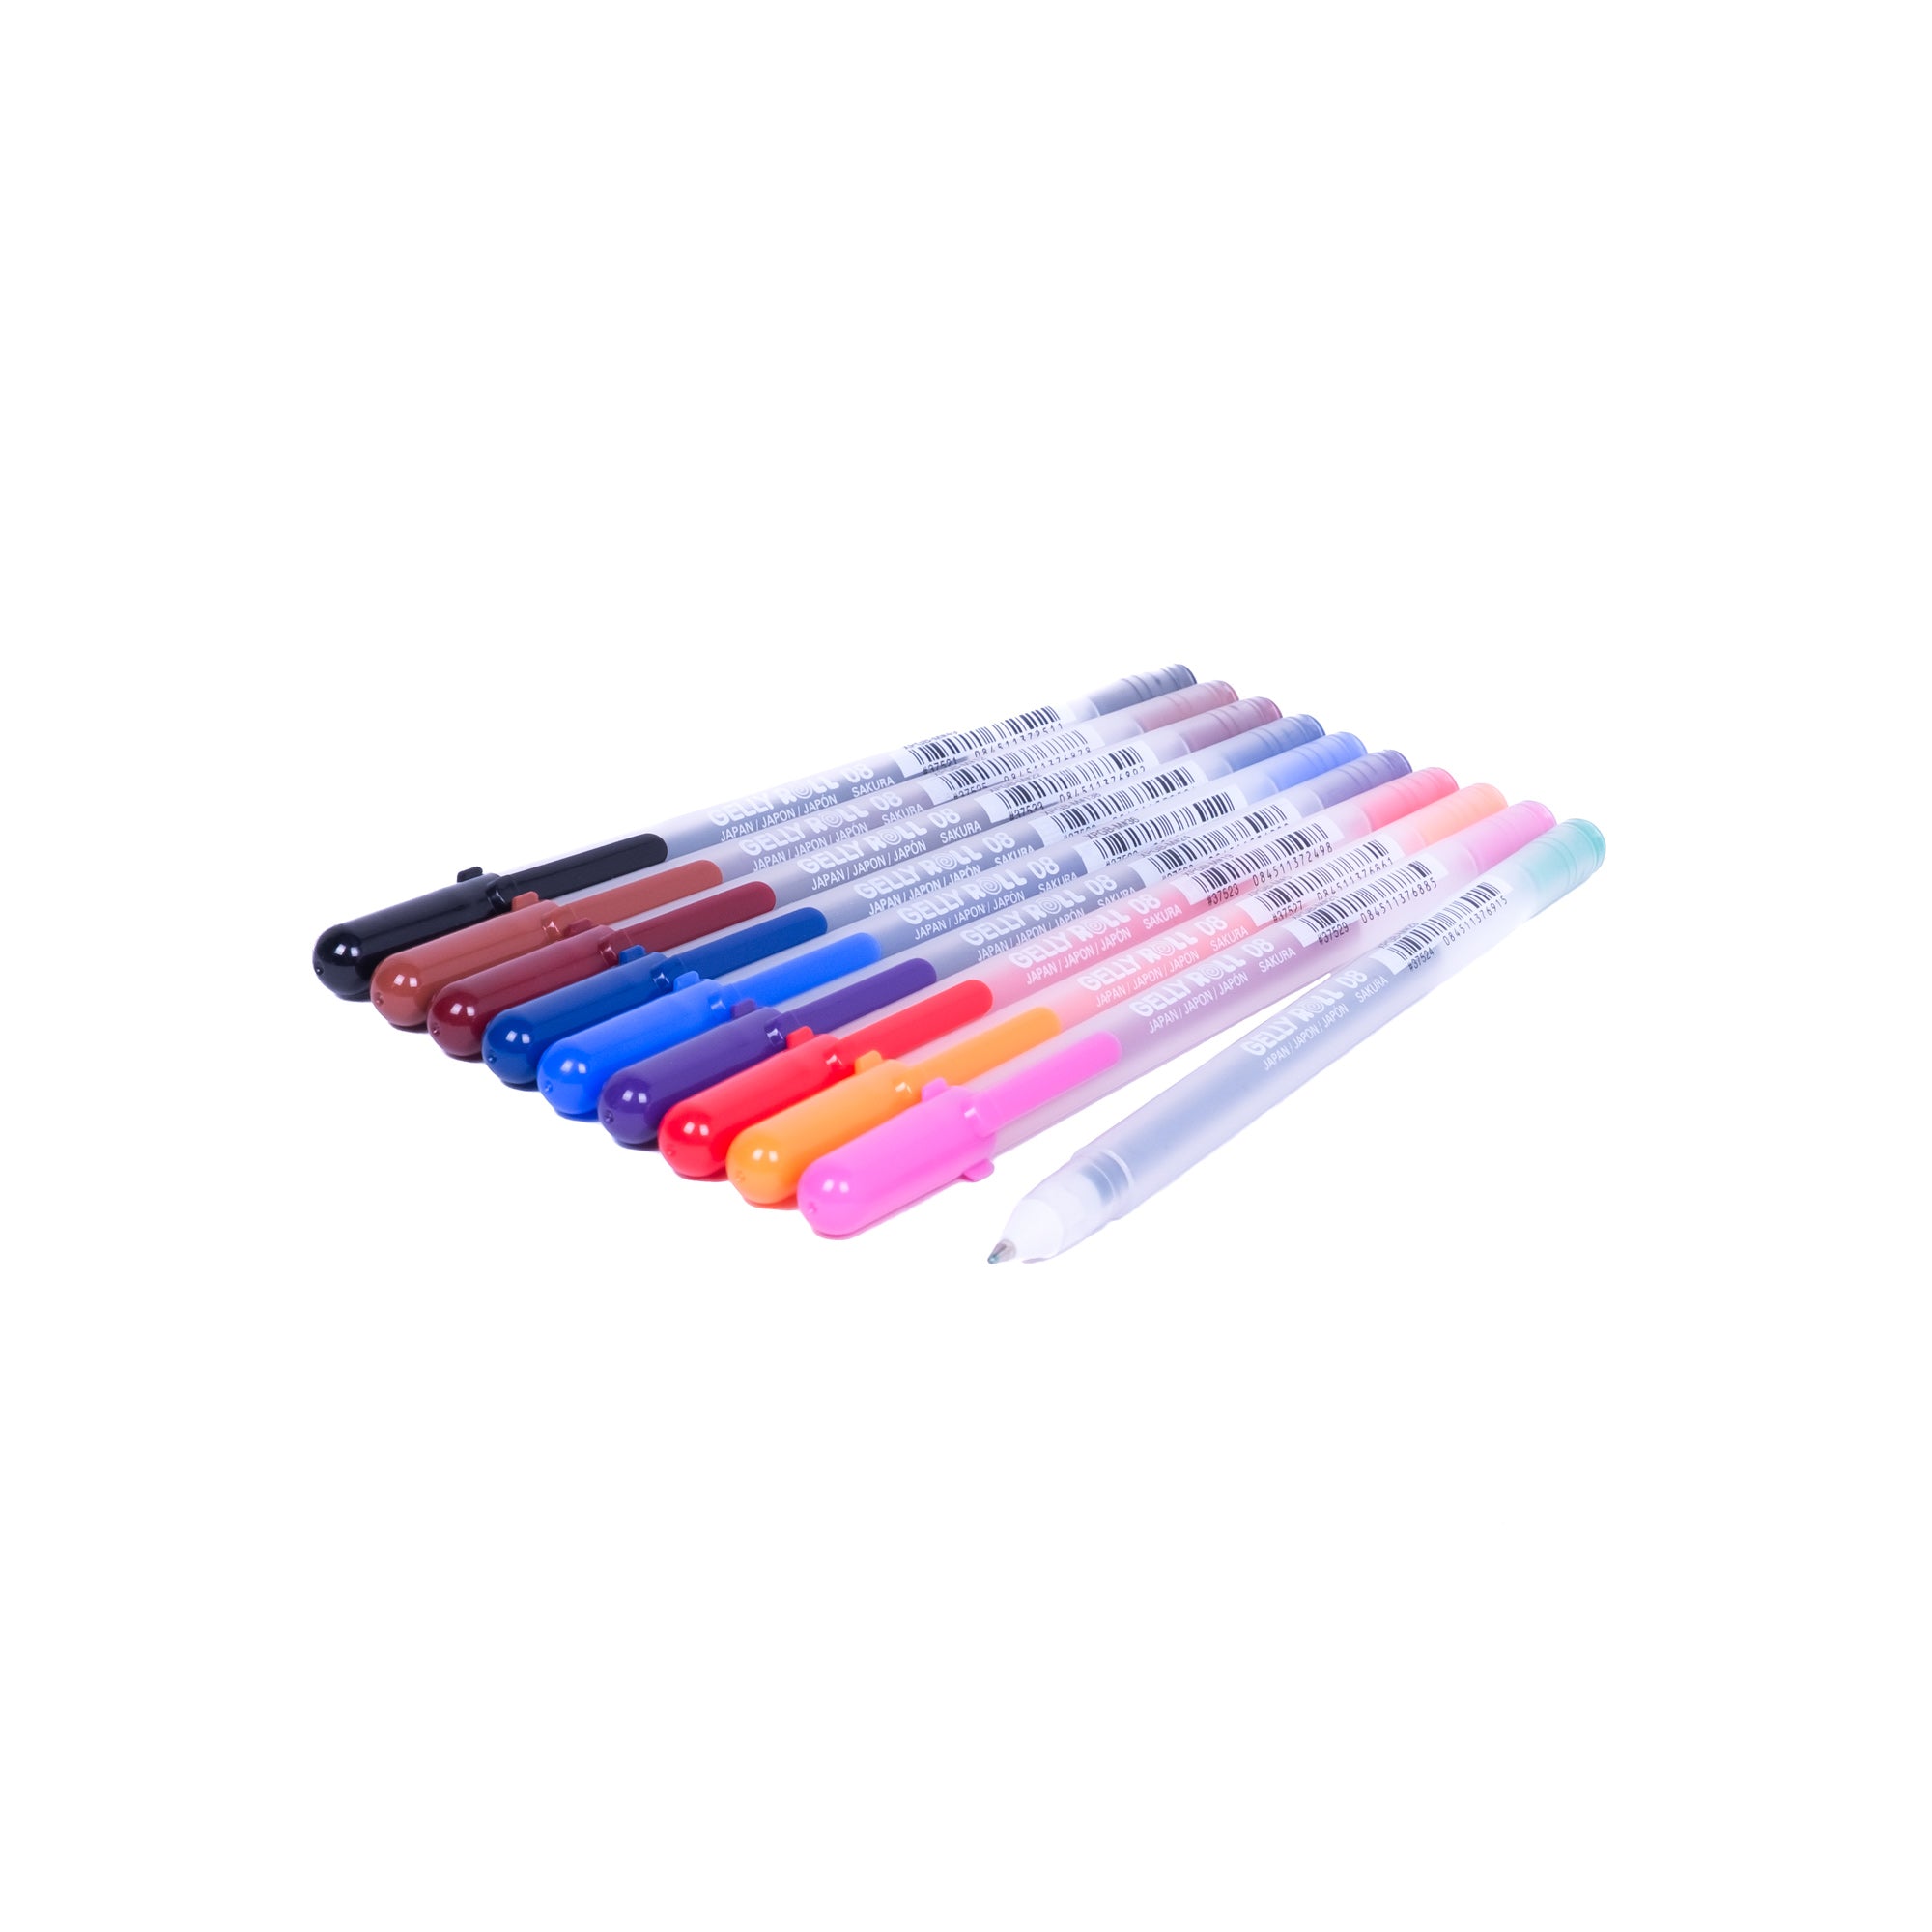 Gelly Roll Glaze Pens assorted basic colors, set of 10